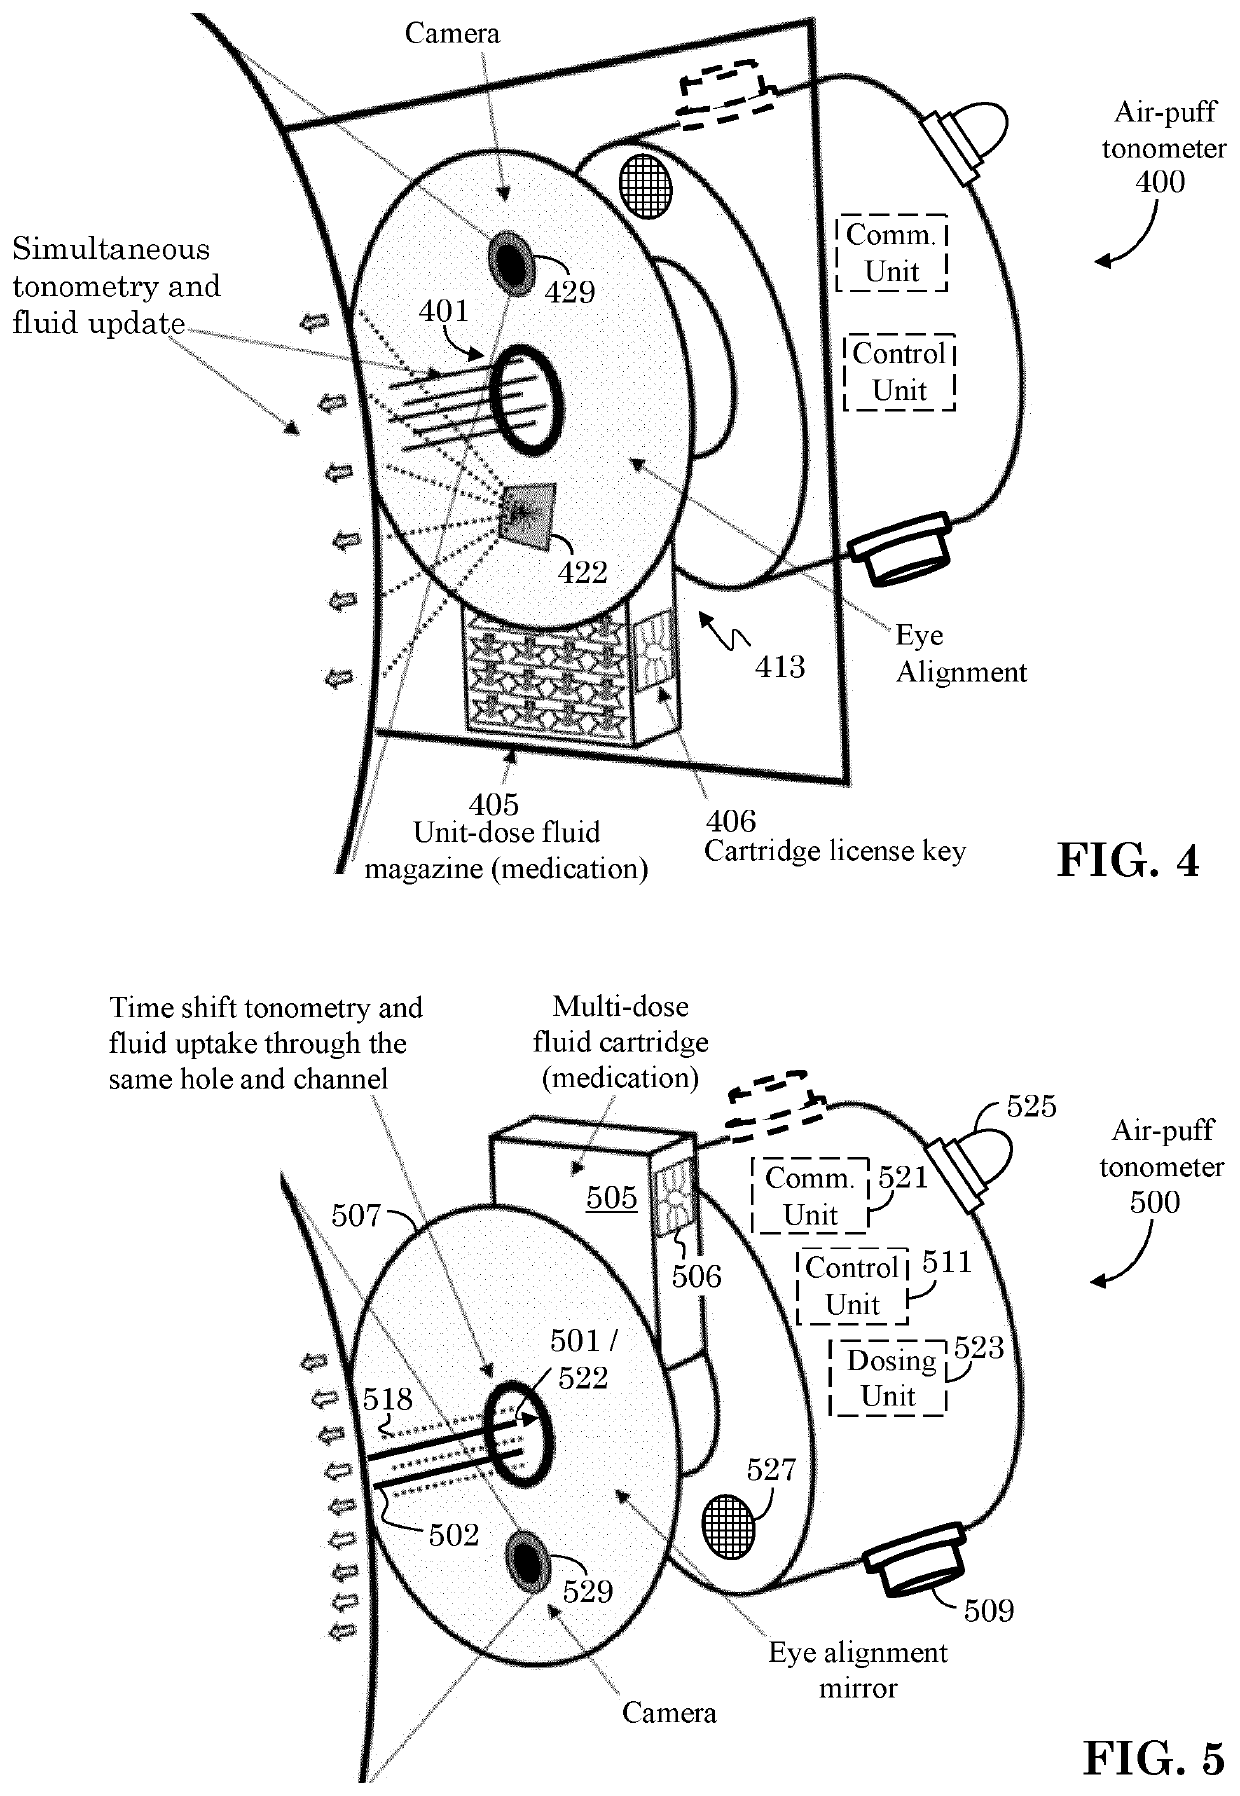 Combination device for tonometrical measuring and drug application on an eye